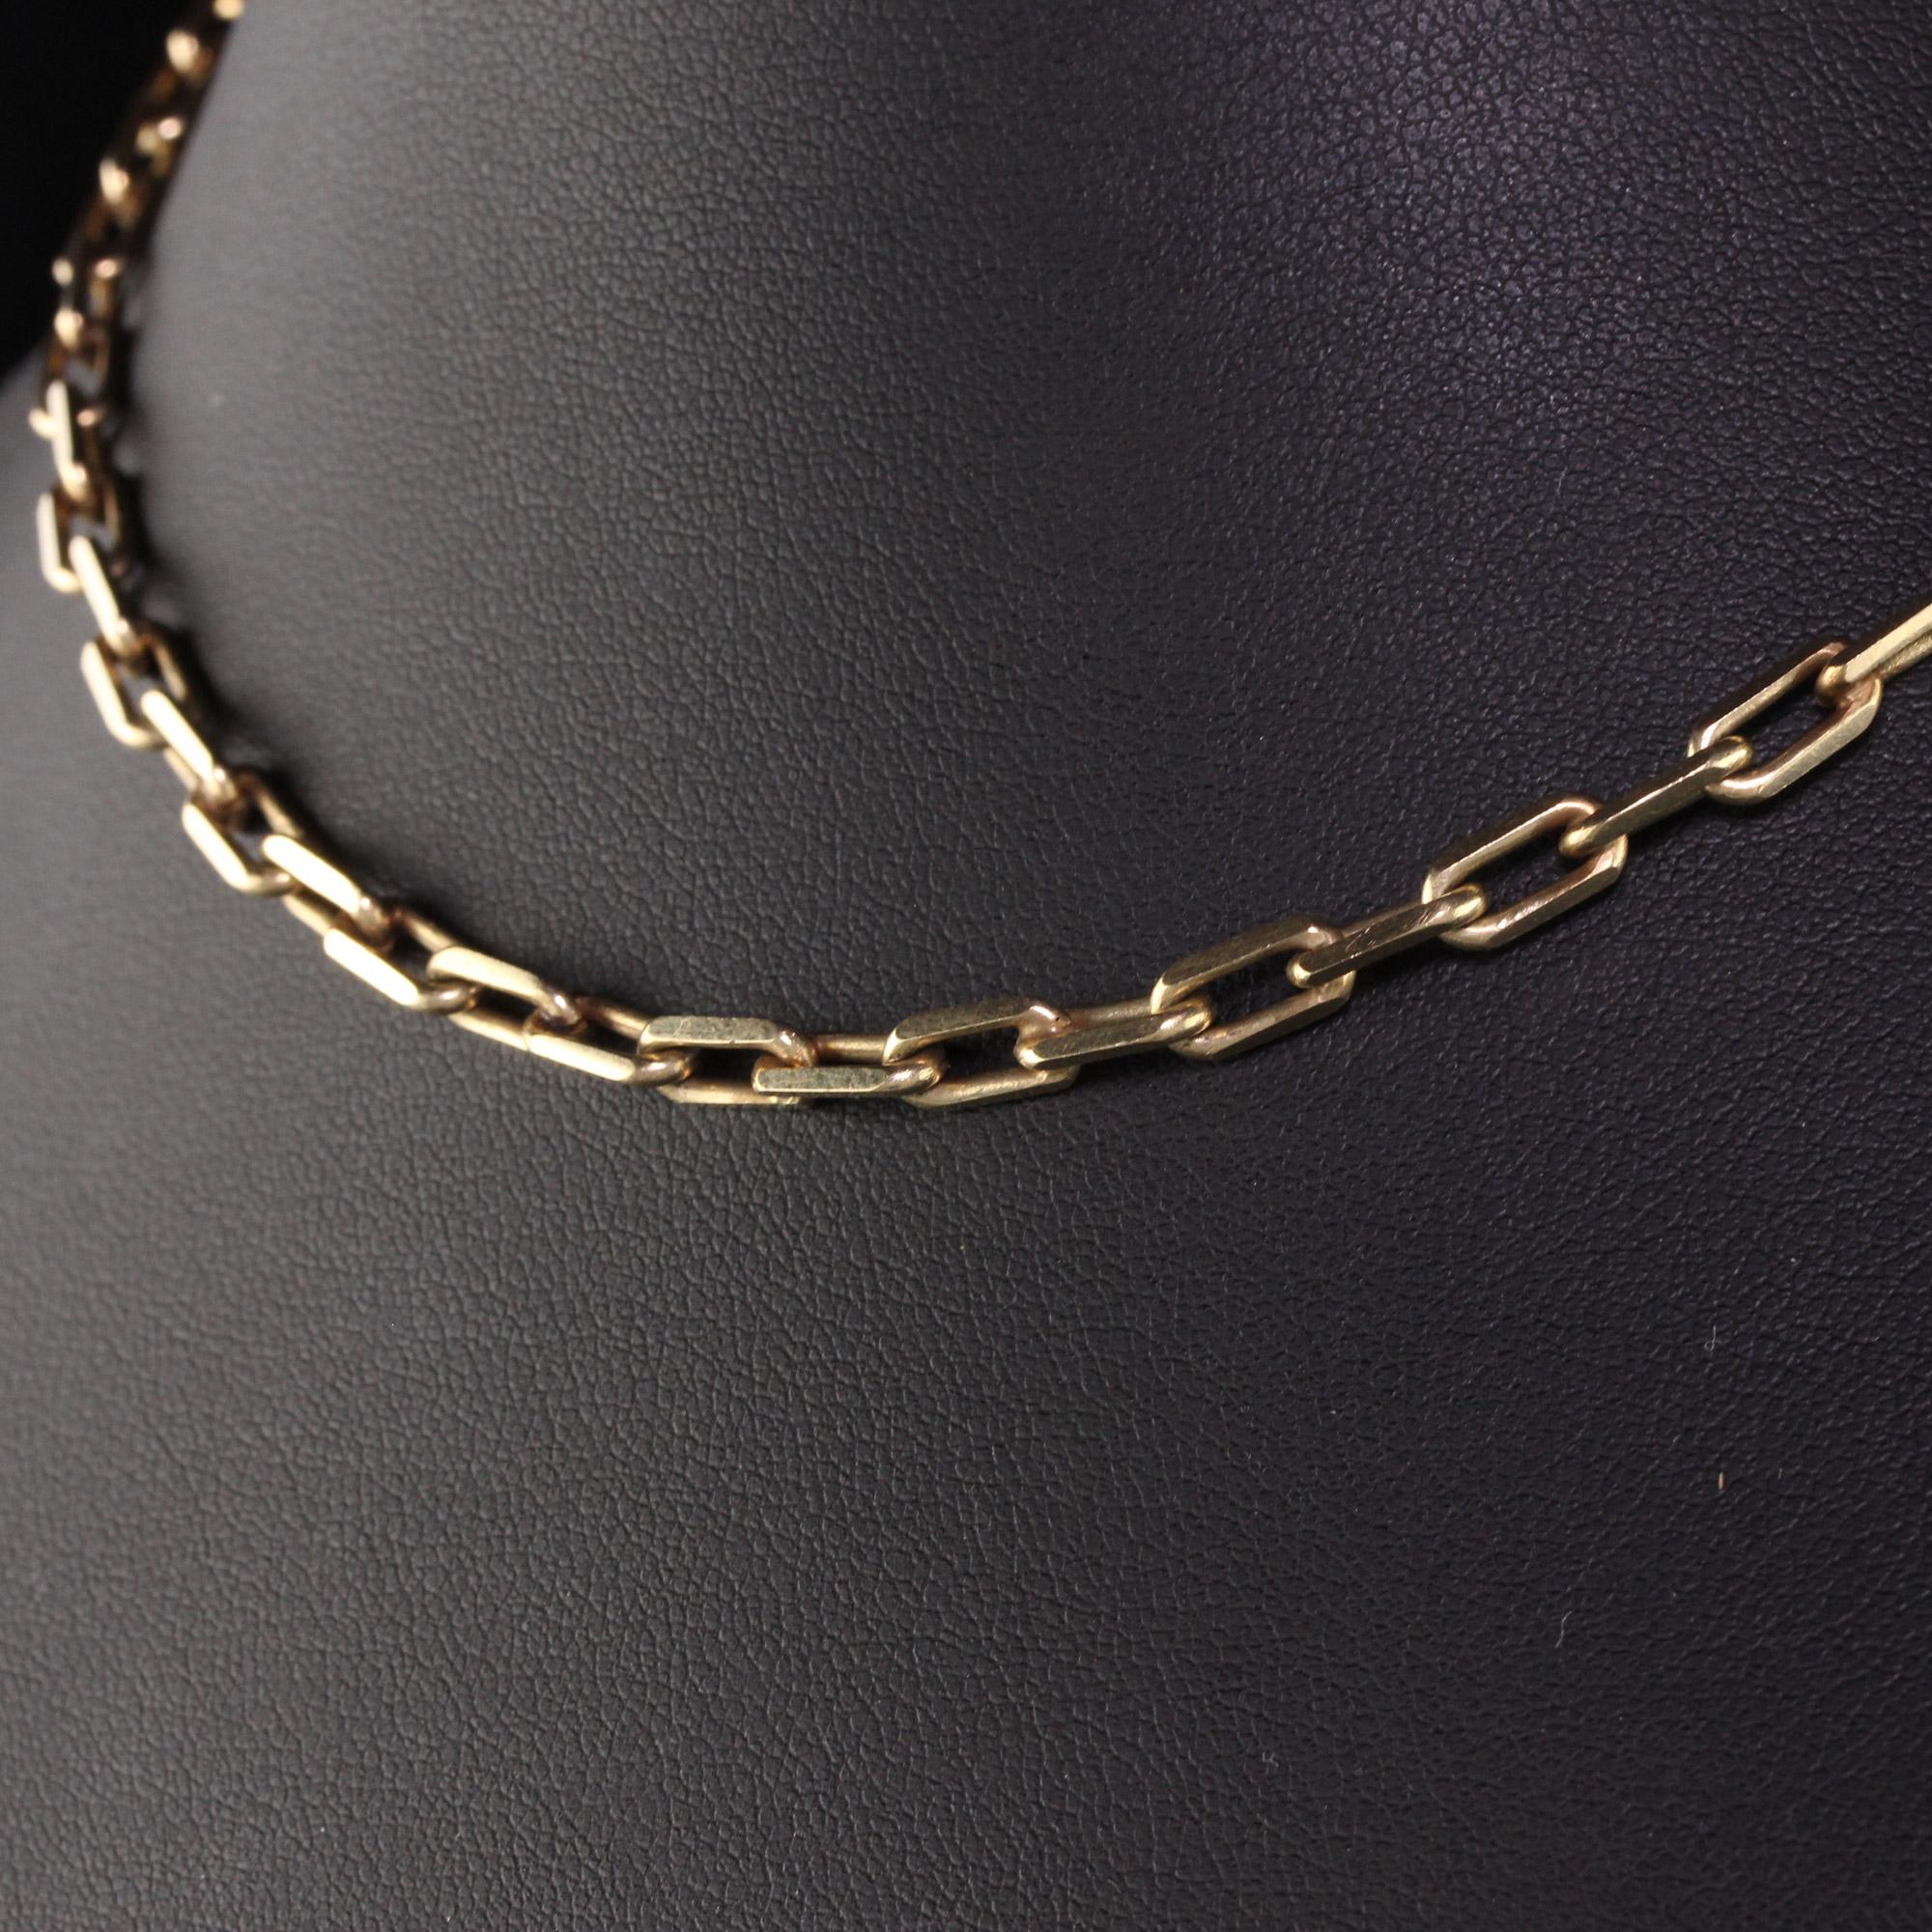 Vintage Estate 14K Yellow Gold Link Chain / Watch Fob 2